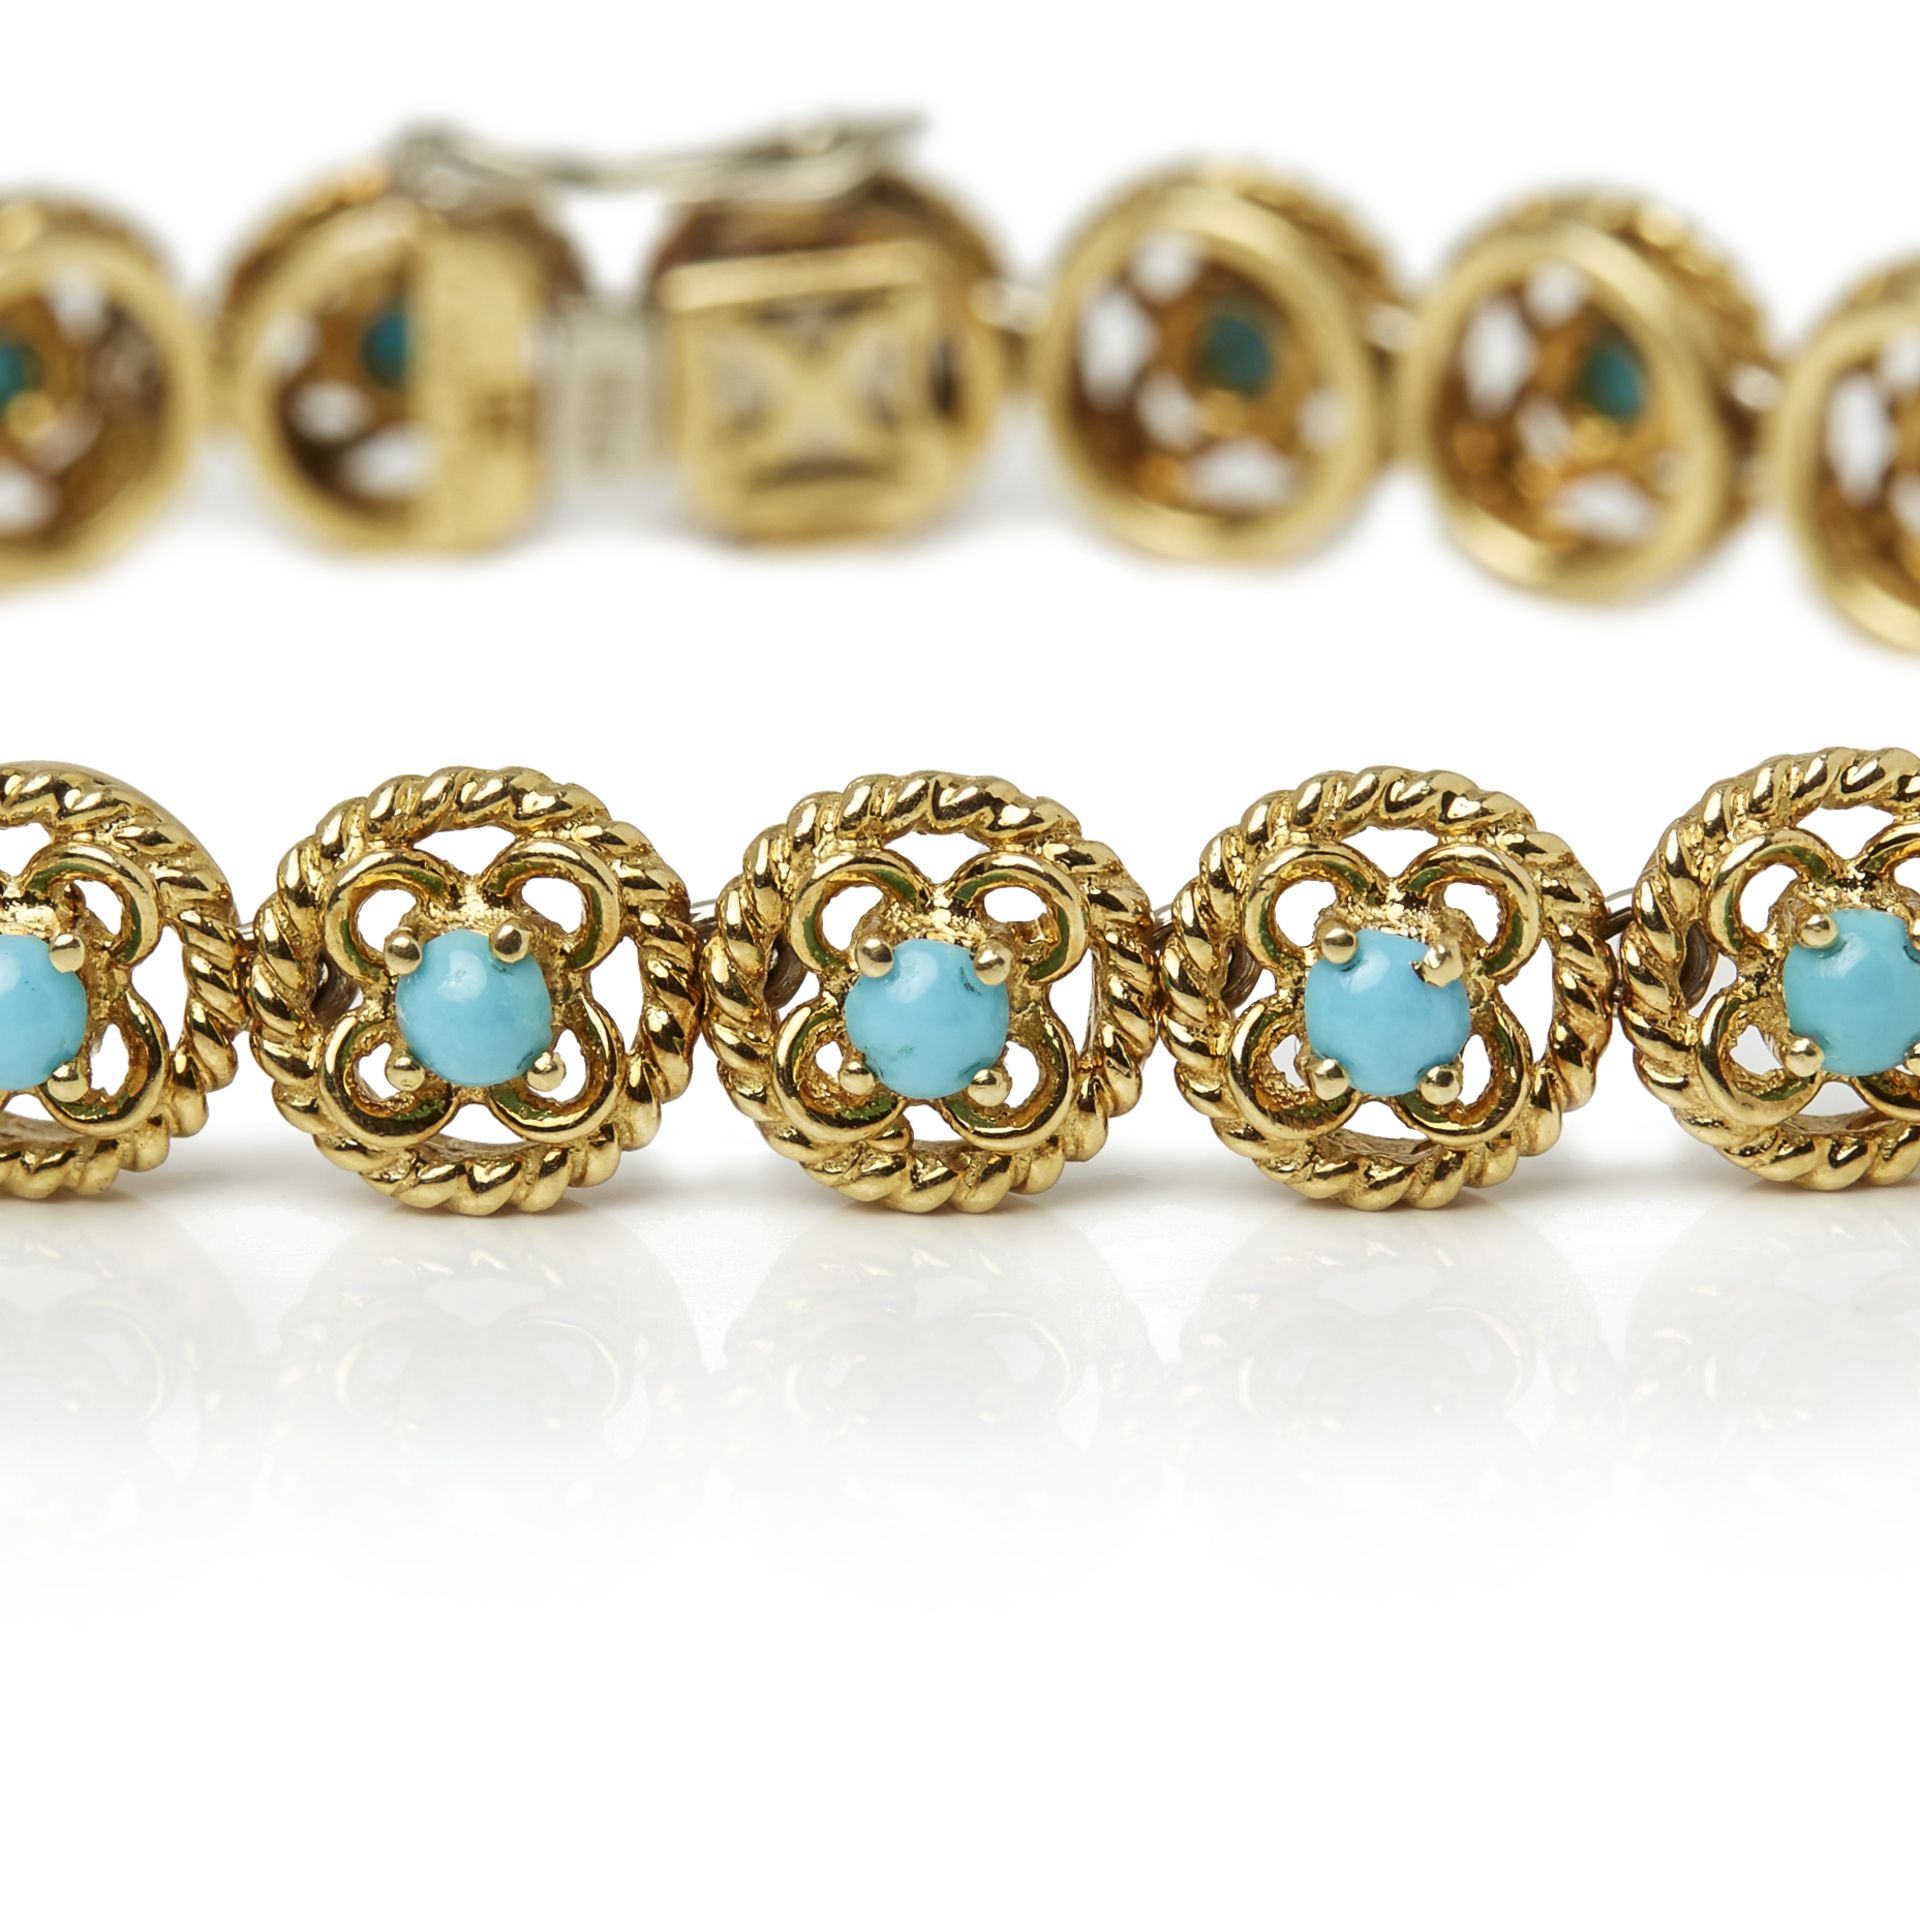 Cartier 18k Yellow Gold Turquoise Bracelet - Image 4 of 9